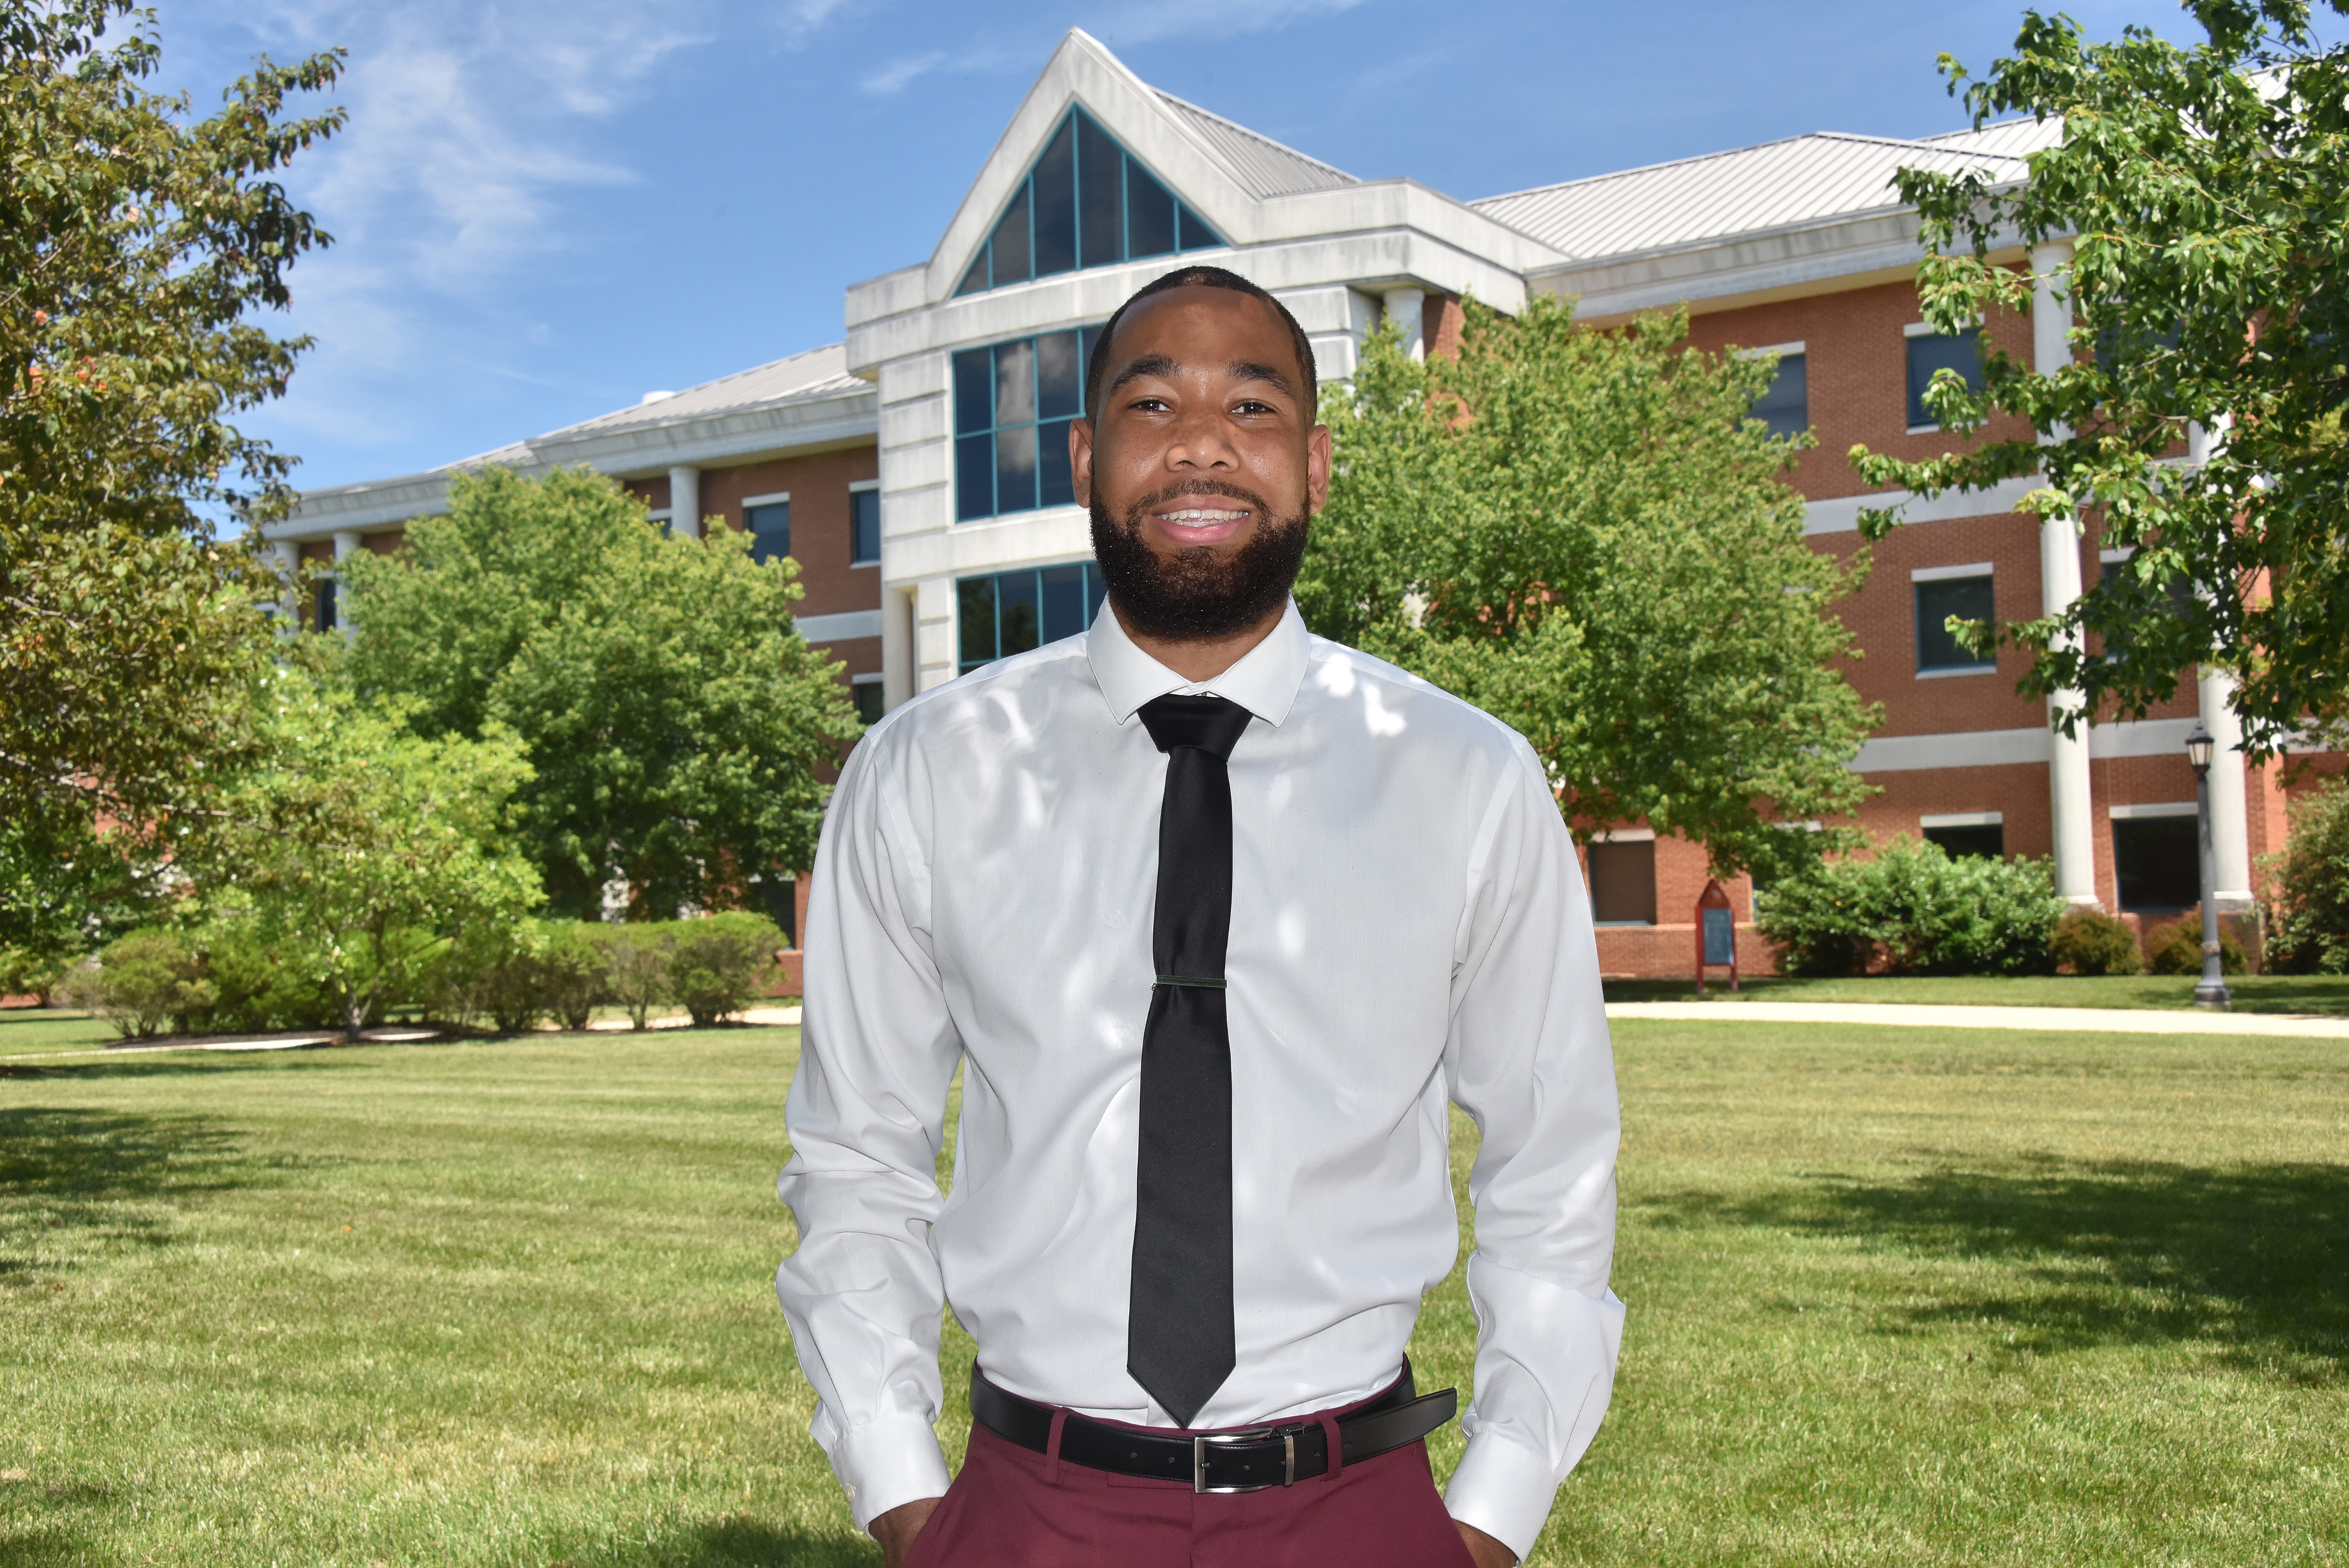 Corban Weatherspoon recognized as Competitiveness Scholar